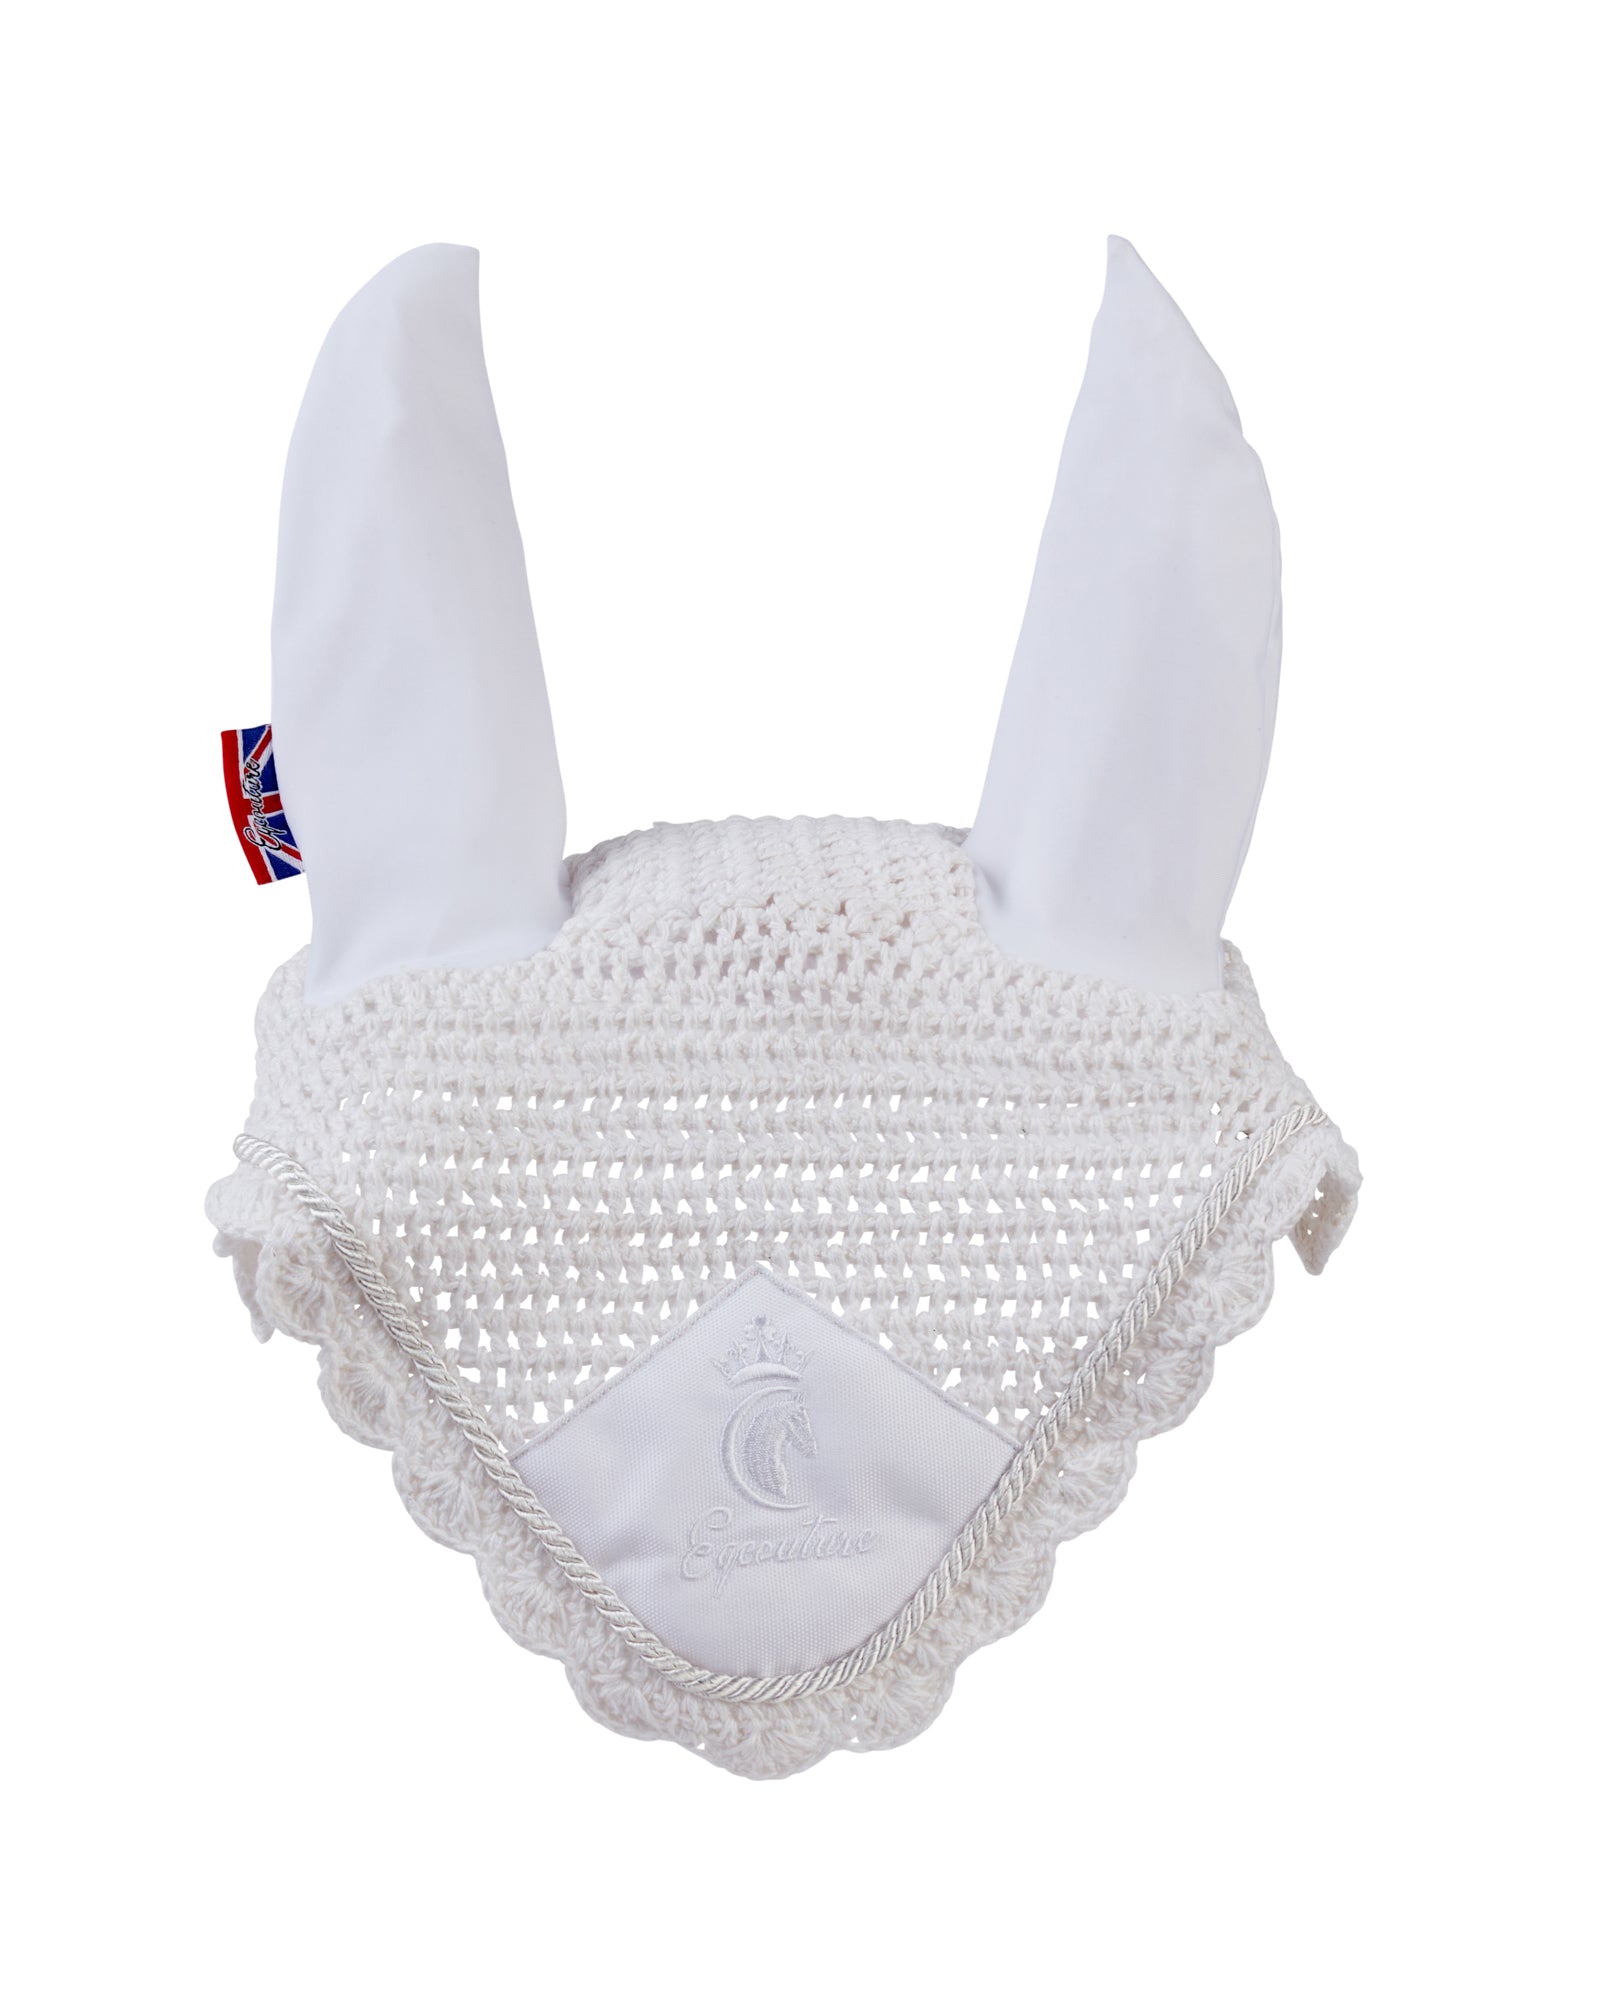 Equestrian horse full/cob/pony white competition fly veil/hood/ears.